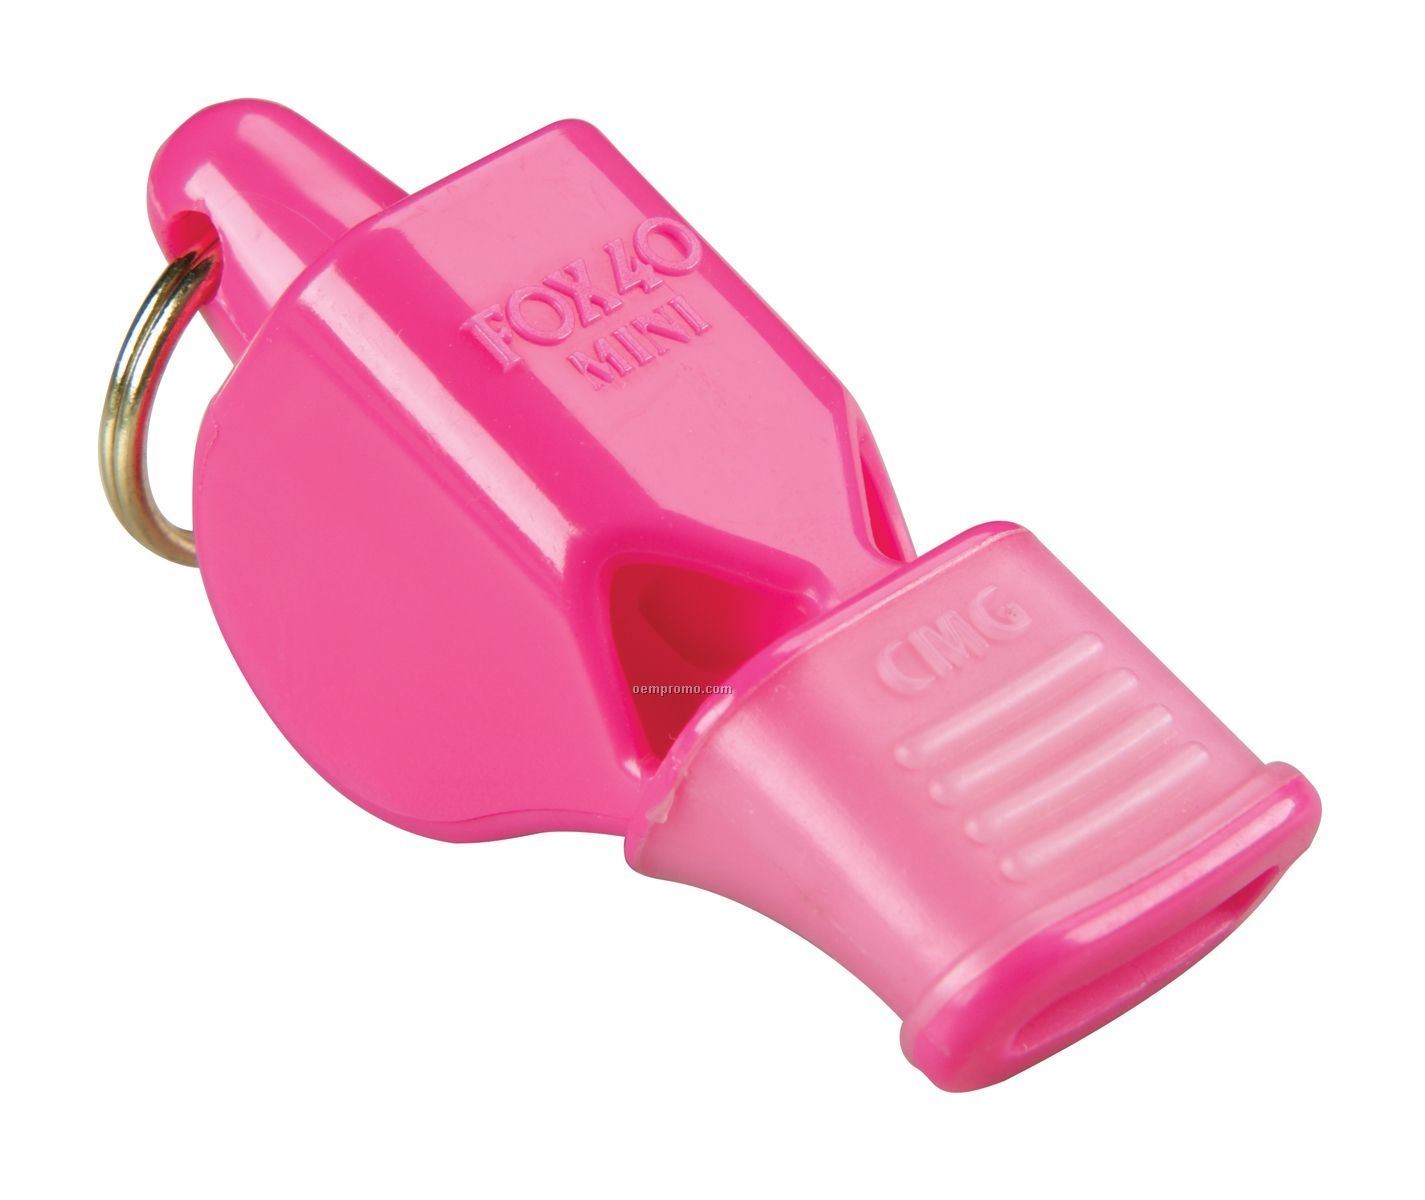 M4c Pealess Whistle W/ Cushioned Mouth Grip